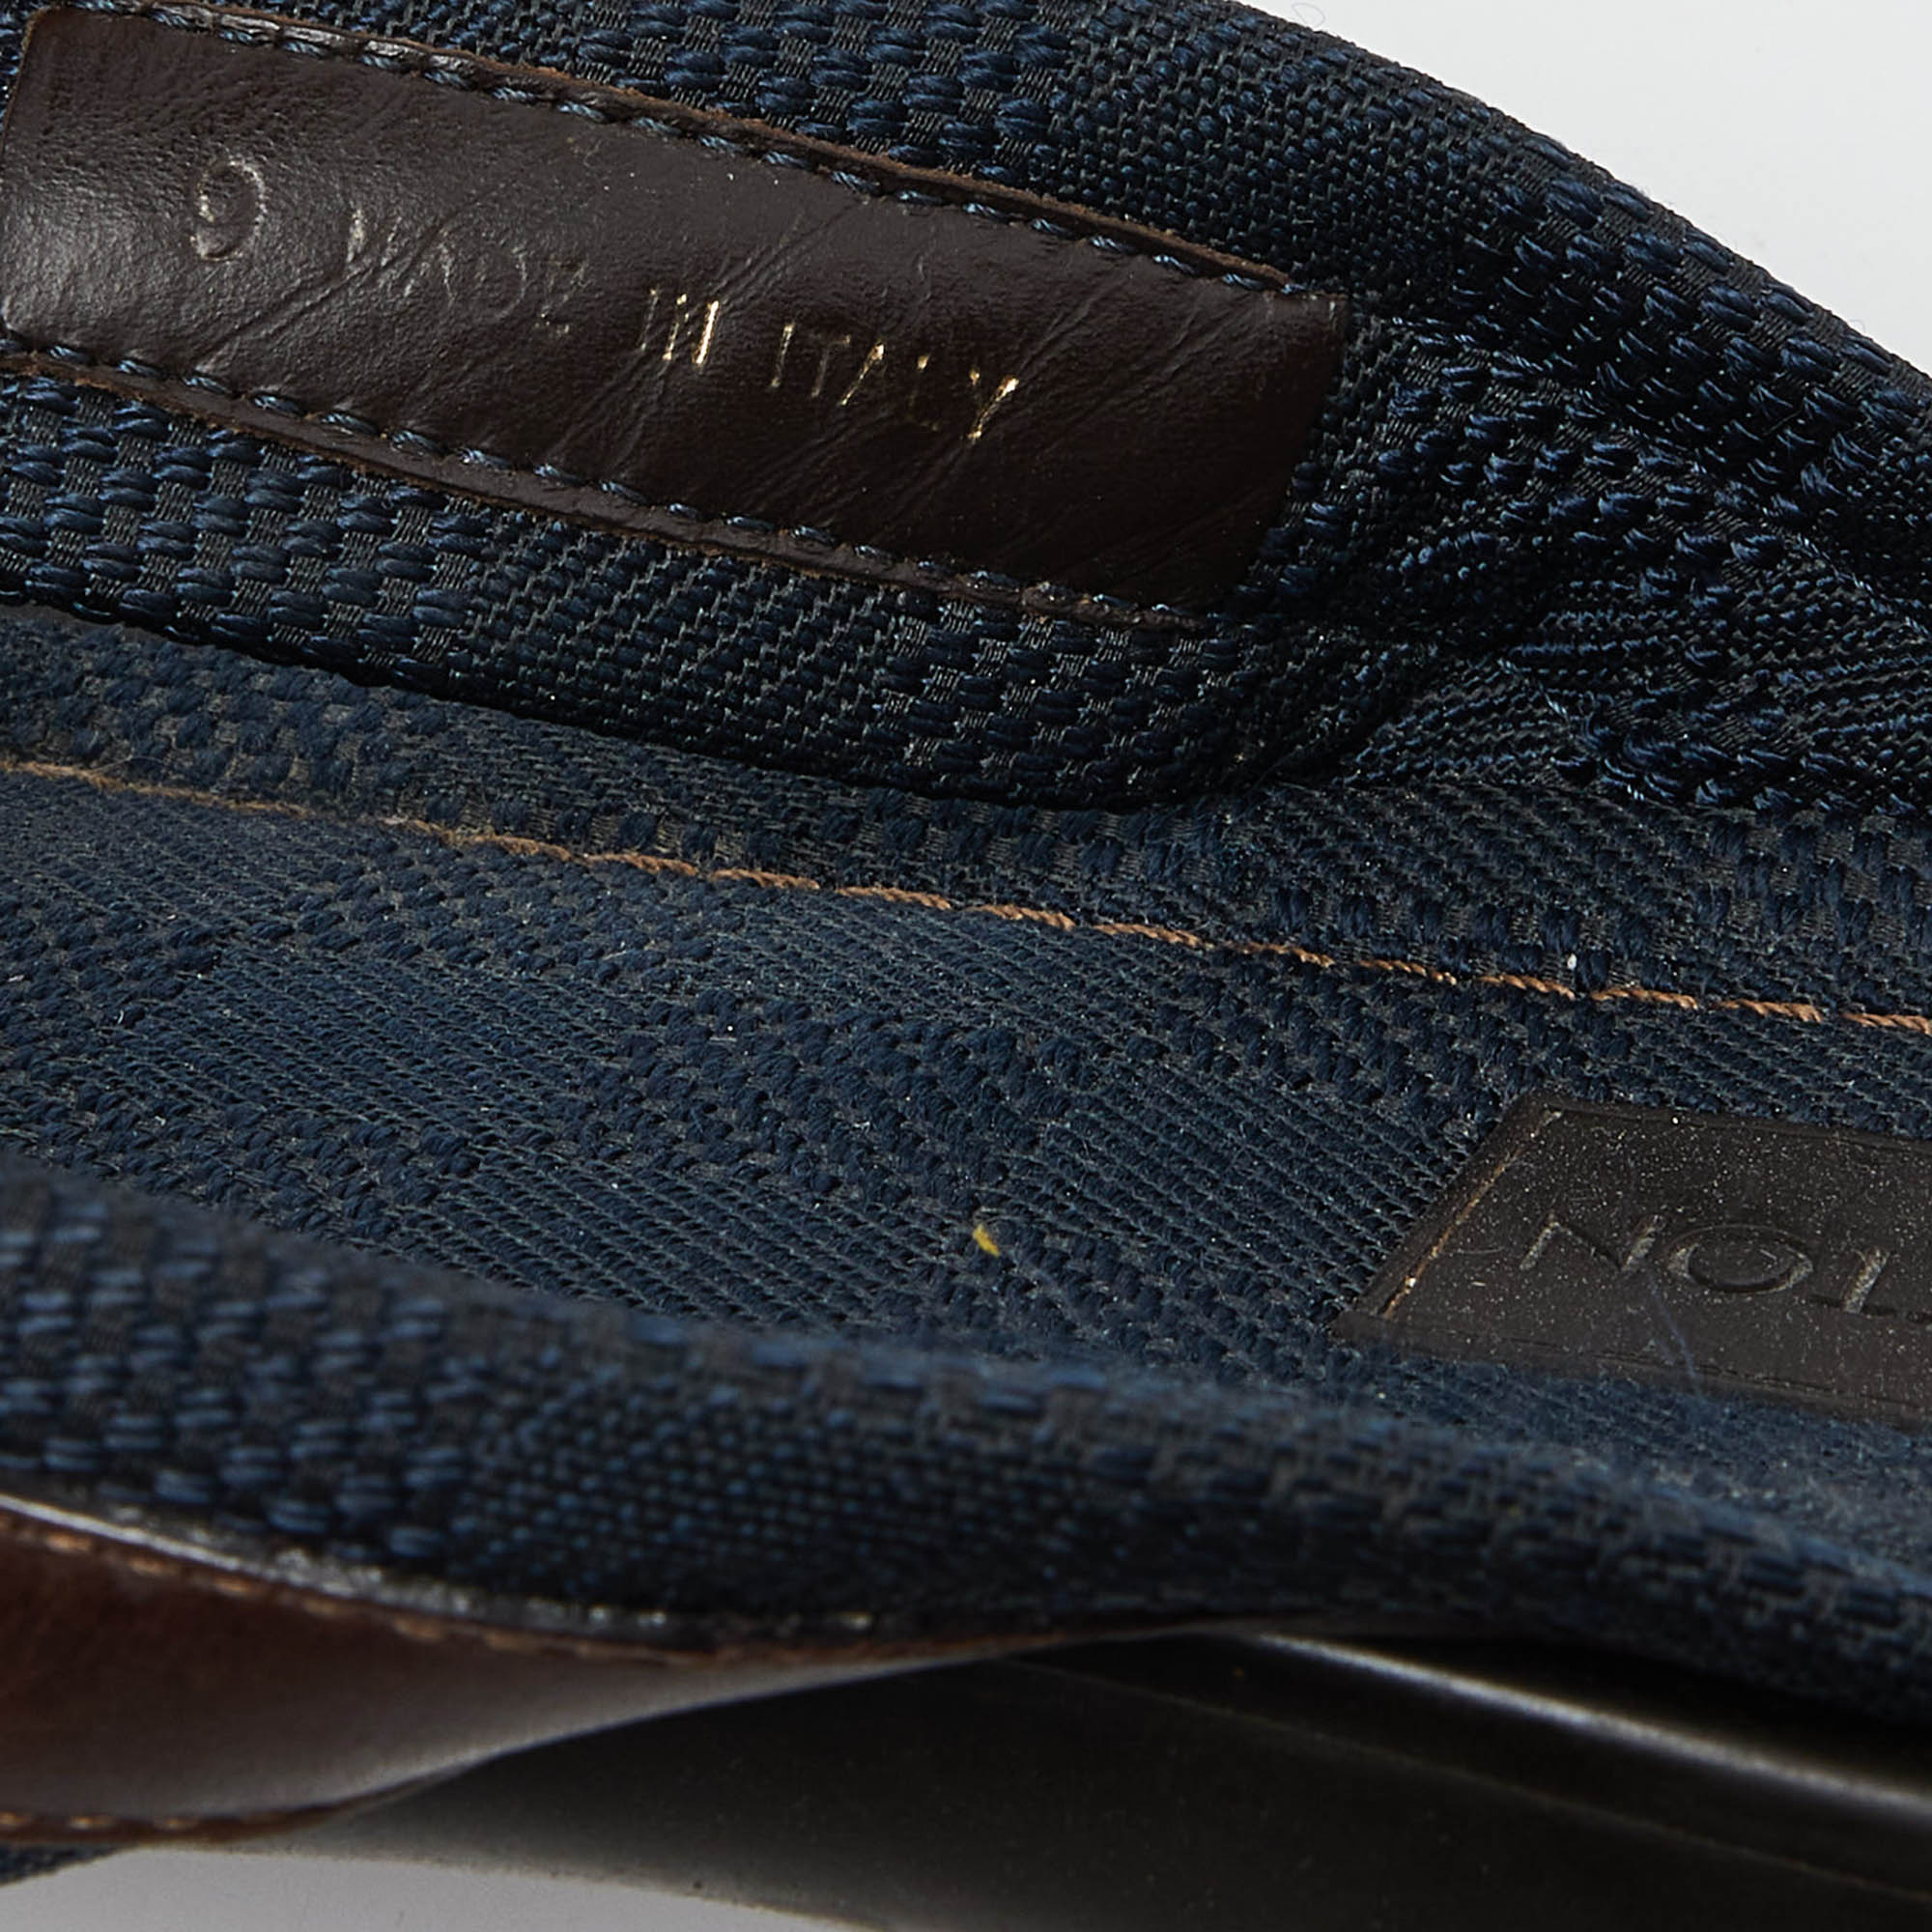 Louis Vuitton Navy Blue/Brown Canvas And Leather Cross Strap Slides Size 43